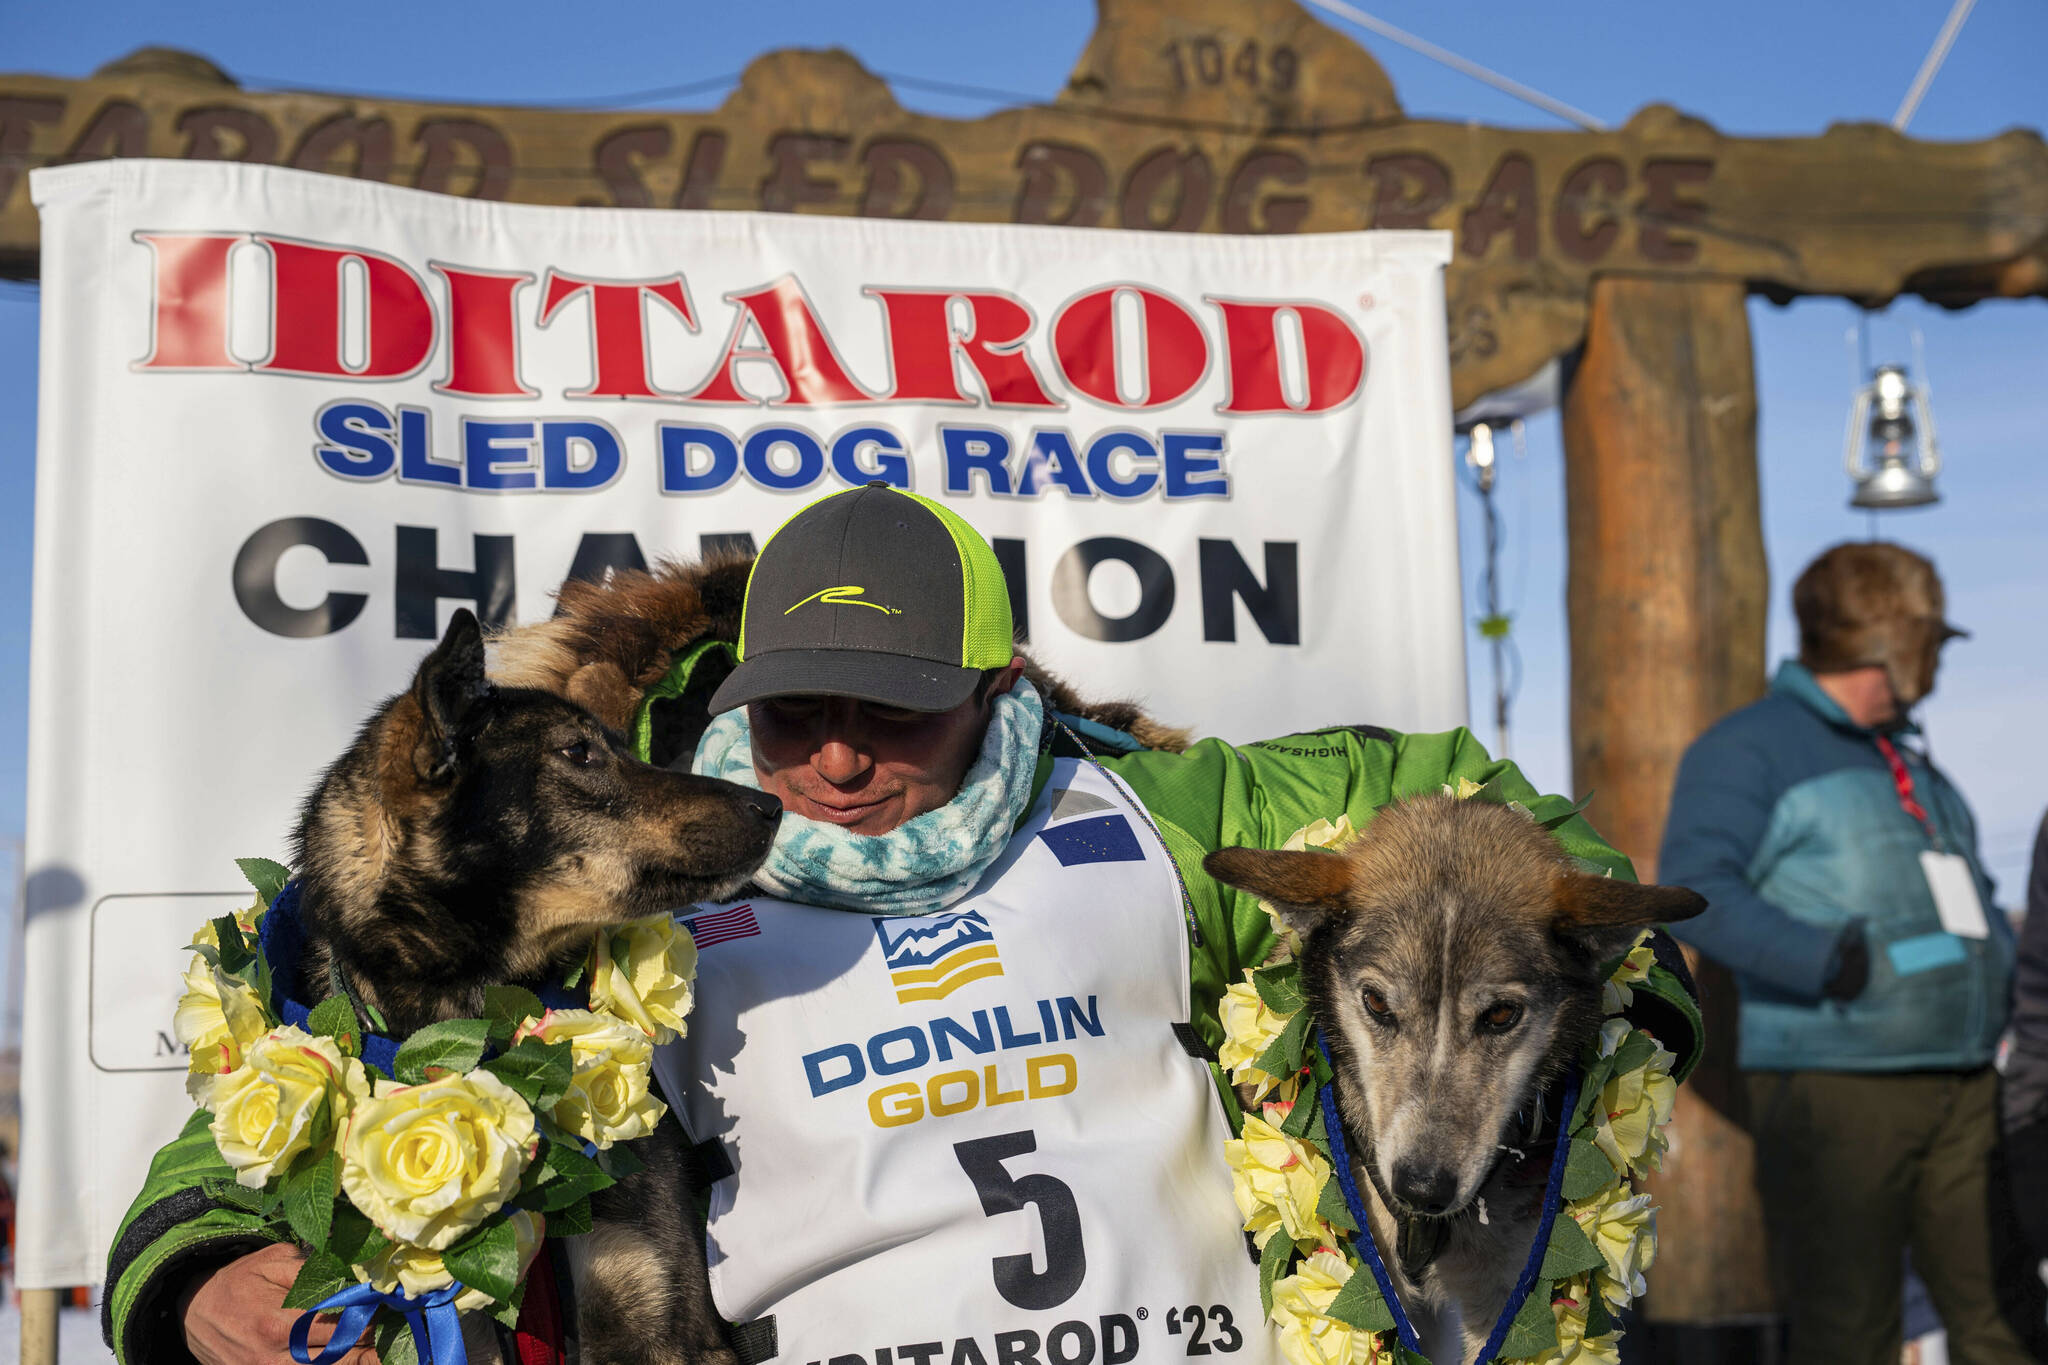 Loren Holmes / Anchorage Daily News 
Ryan Redington poses with his lead dogs Sven, left, and Ghost, after he won the 2023 Iditarod Trail Sled Dog Race, Tuesday, March 14, 2023 in Nome, Alaska. Redington, 40, is the grandson of Joe Redington Sr., who helped co-found the arduous race across Alaska that was first held in 1973 and is known as the “Father of the Iditarod.”